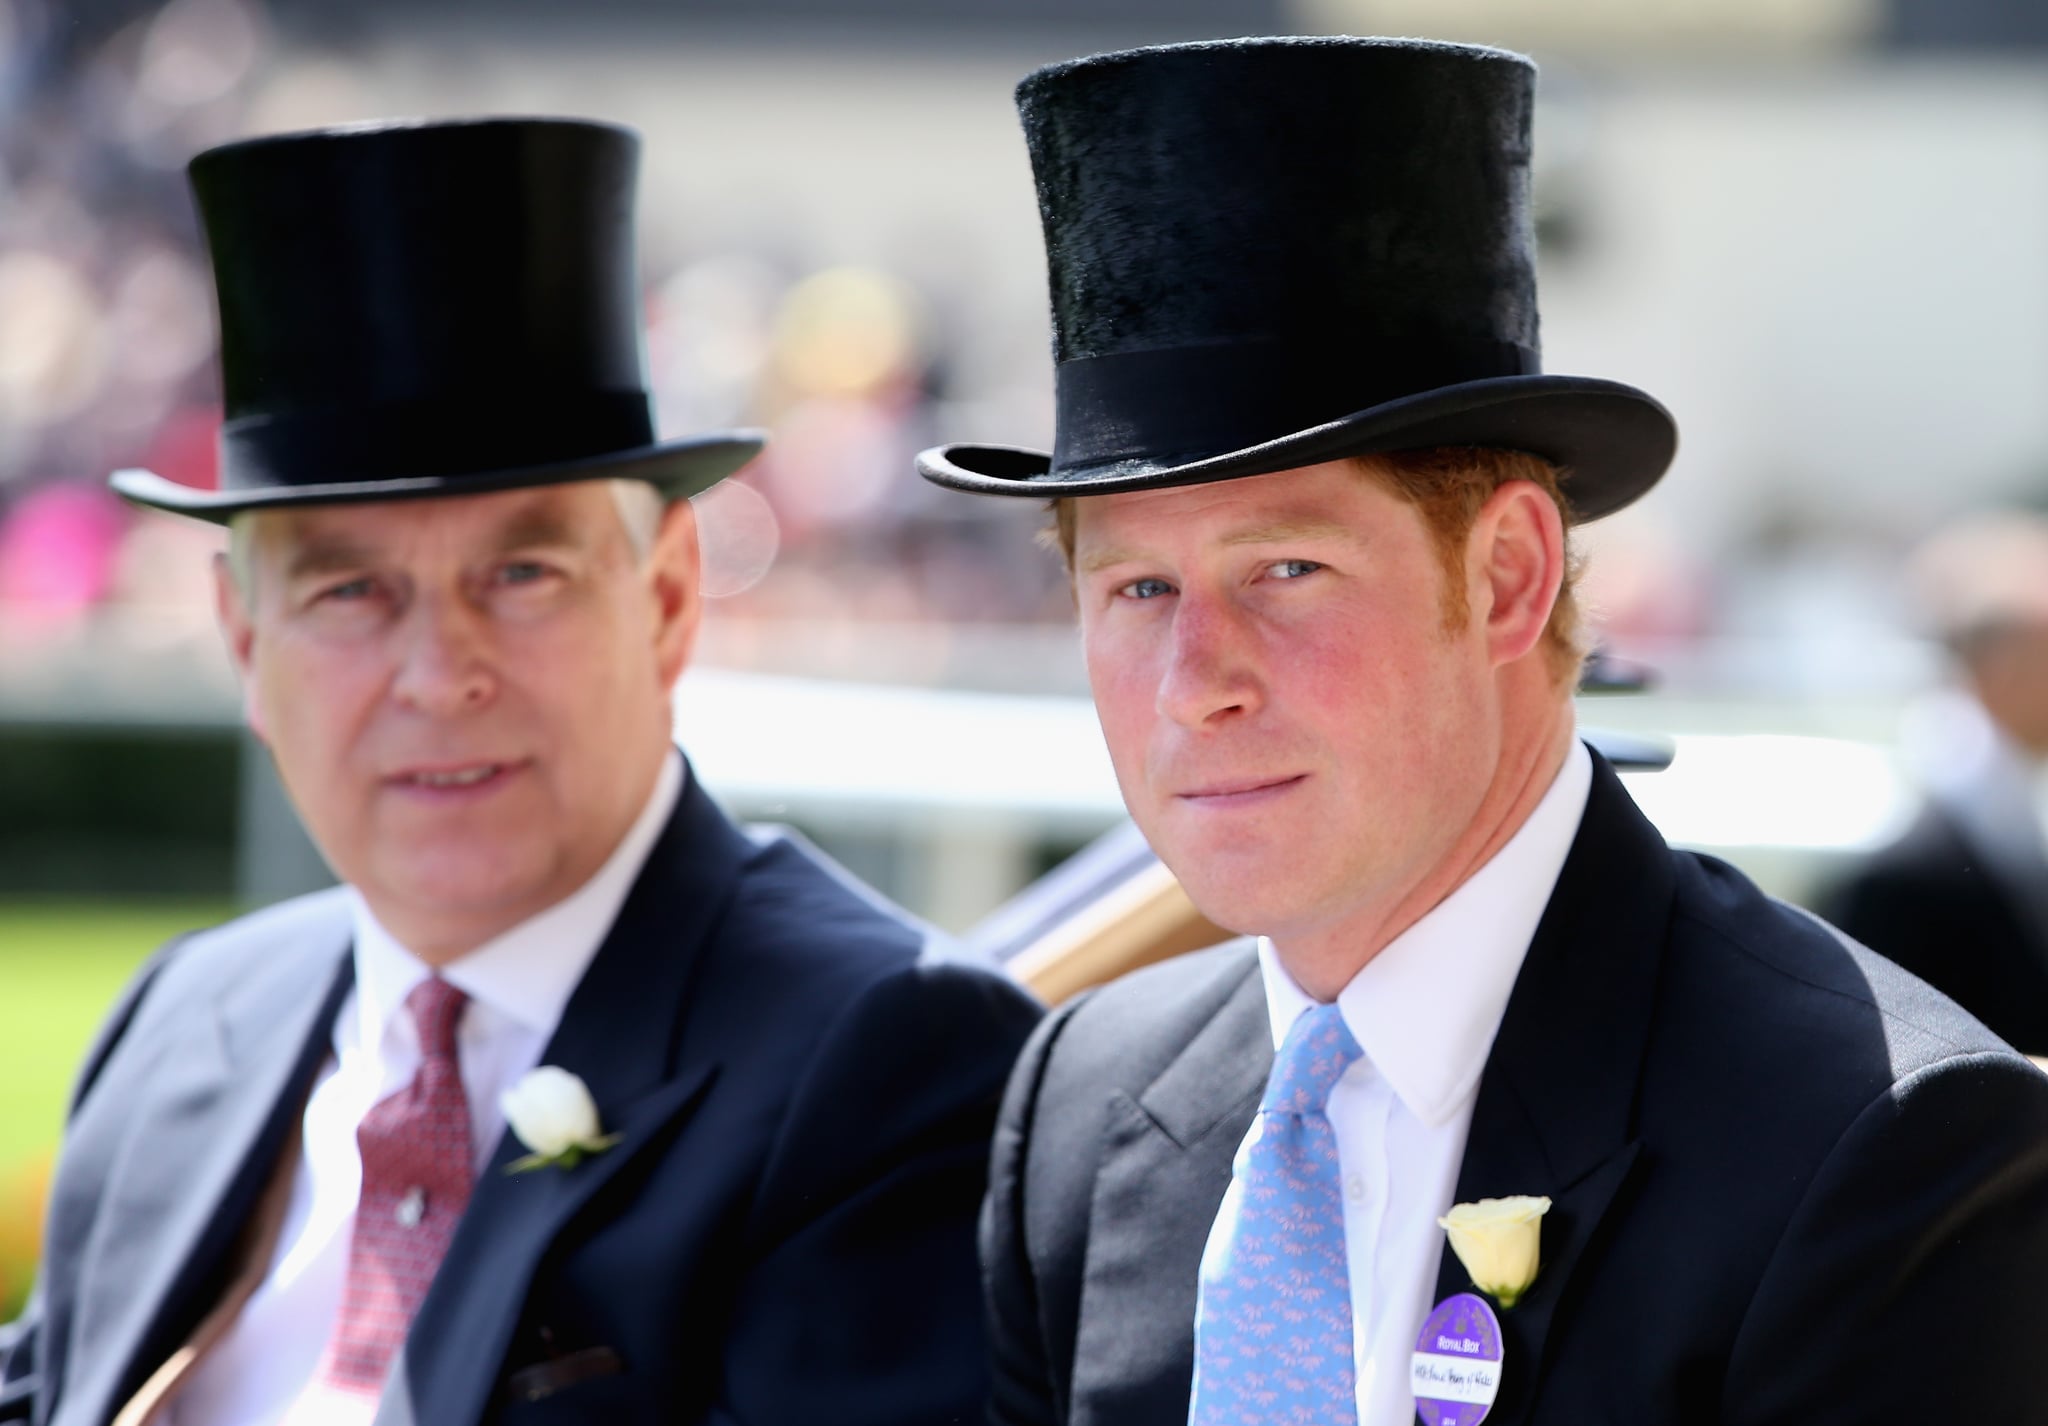 ASCOT, ENGLAND - JUNE 17: (CD) Prince Andrew, Duke of York and Prince Harry attend the first day of Royal Ascot at Ascot Racecourse on June 17, 2014 in Ascot, England.  (Photo by Chris Jackson/Getty Images for Ascot Racecourse)